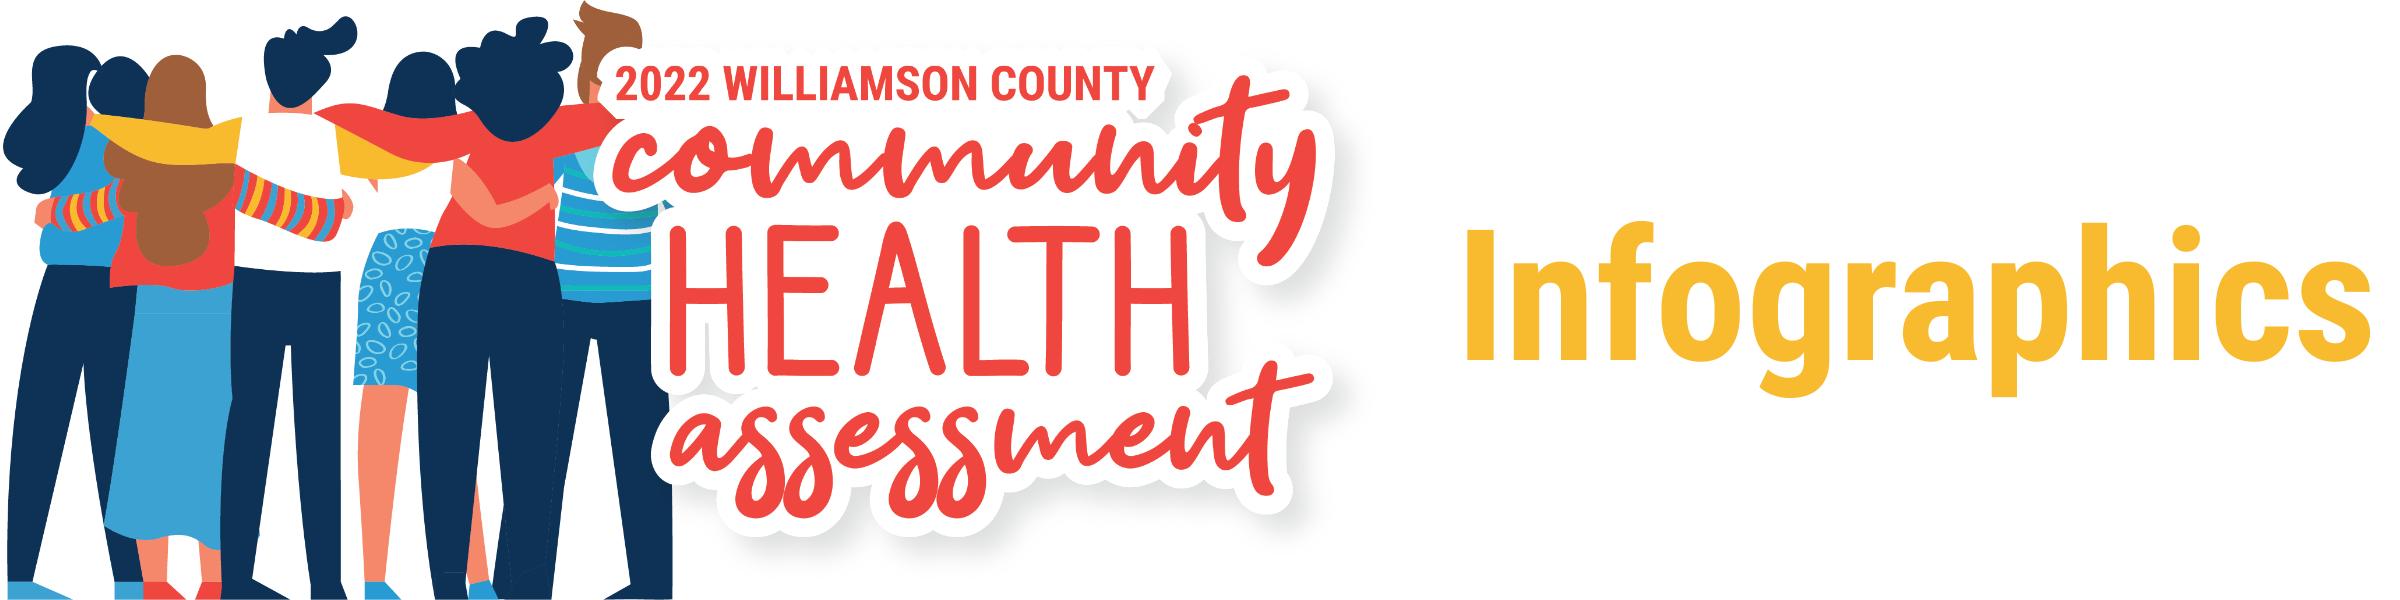 2022 Williamson County Community Health Assessment Infographics